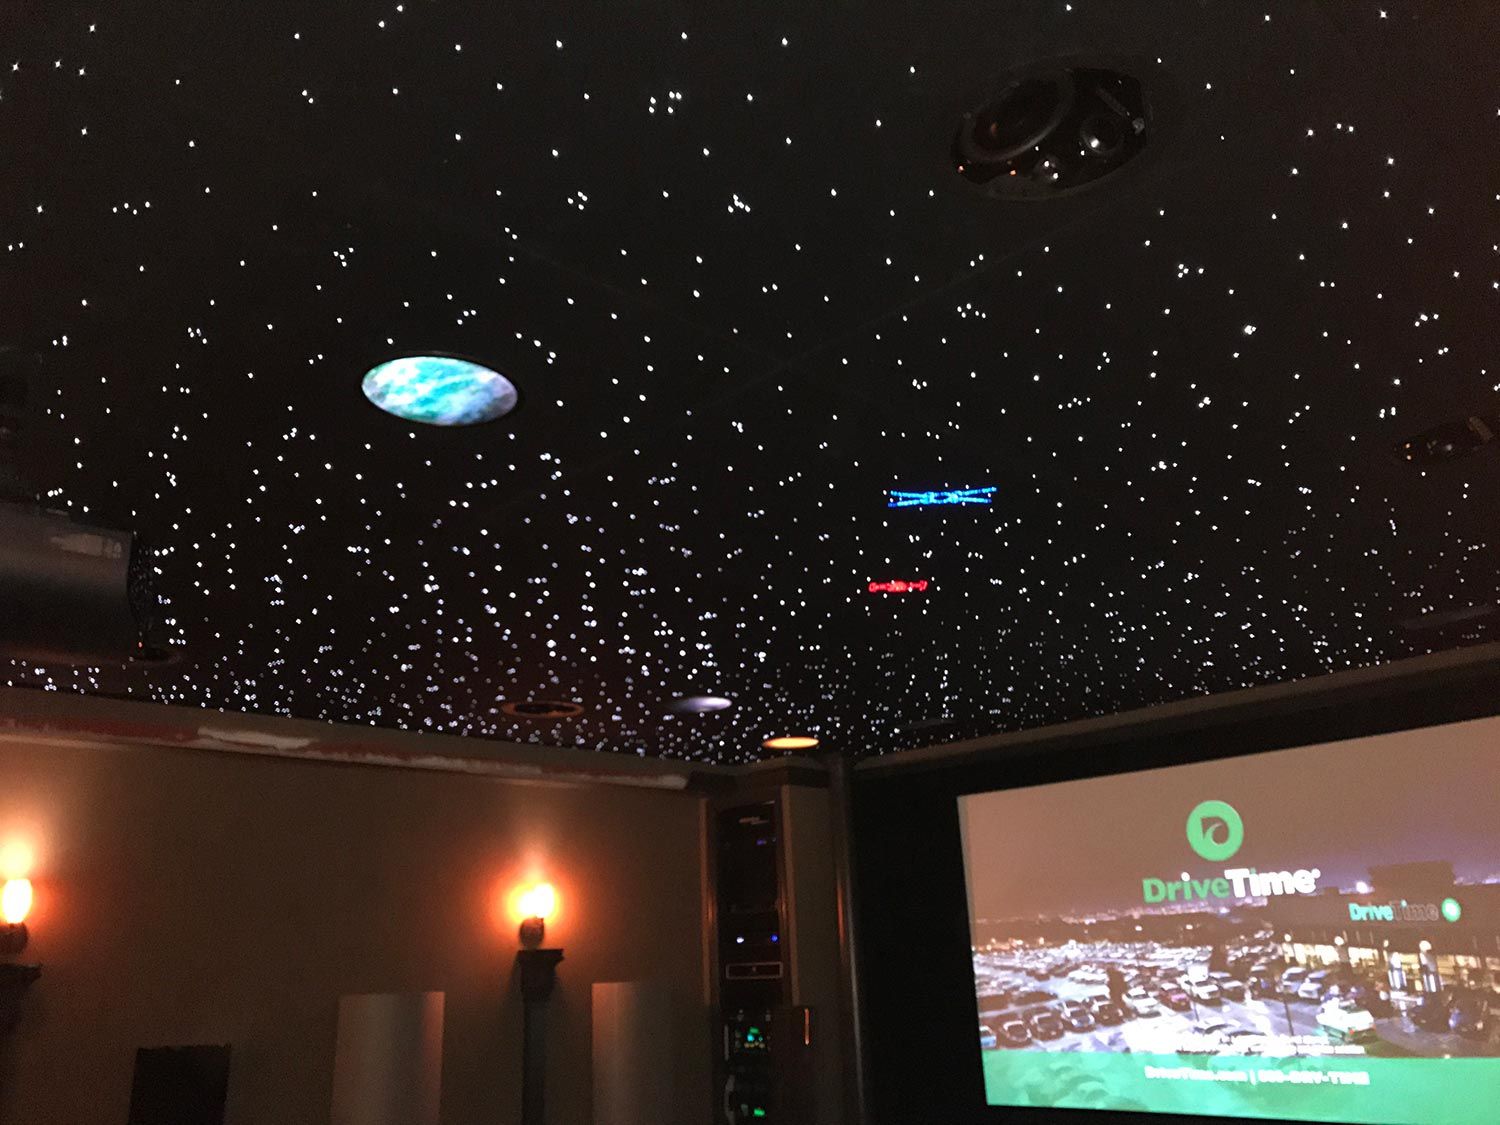 Star LED lighting ceiling in a home theater